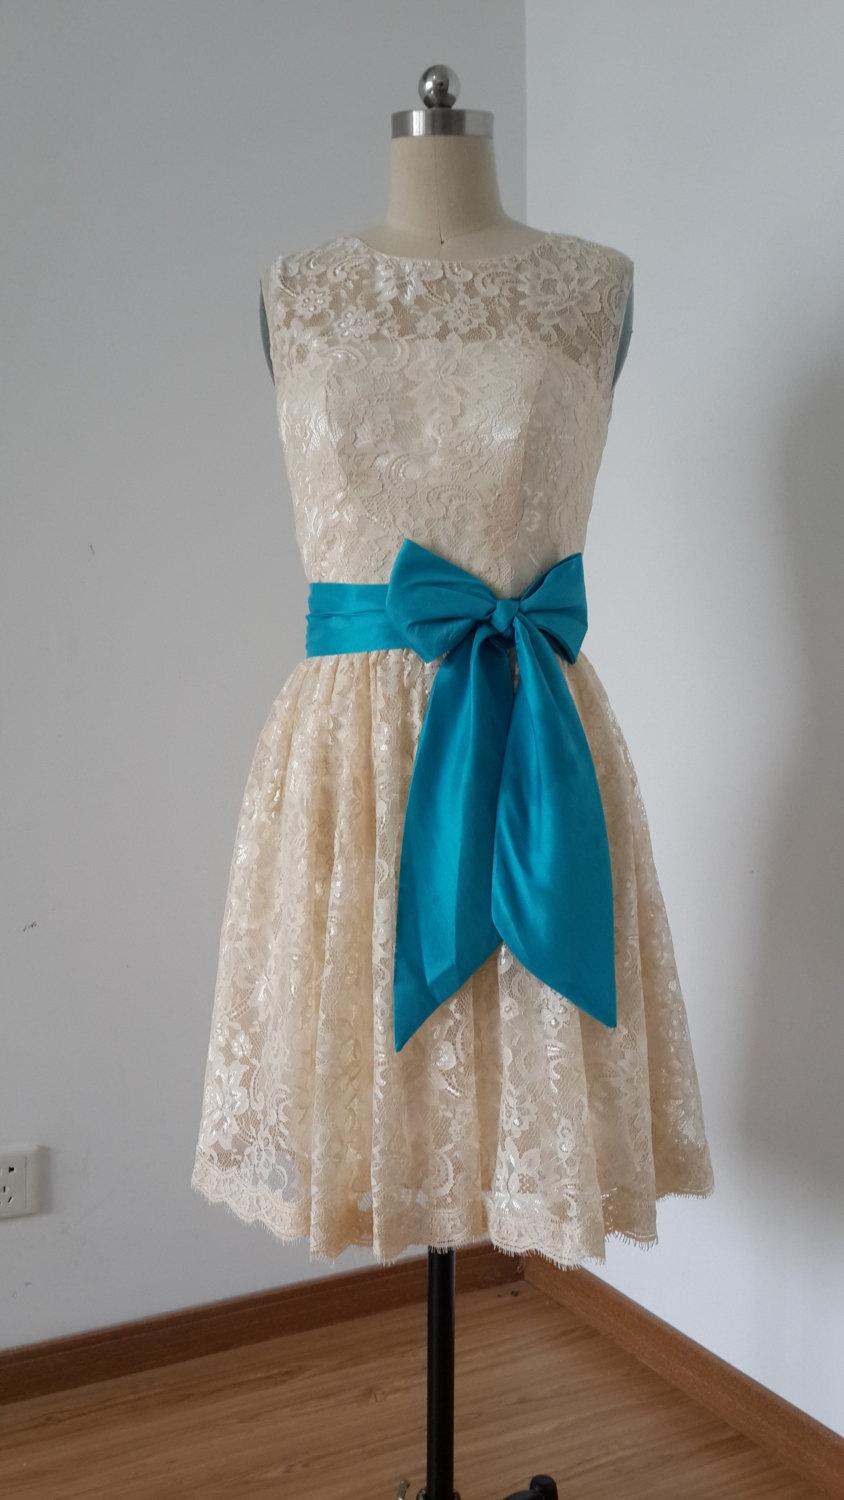 Mariage - 2015 Champagne Lace Short Bridesmaid Dress with Teal Bow